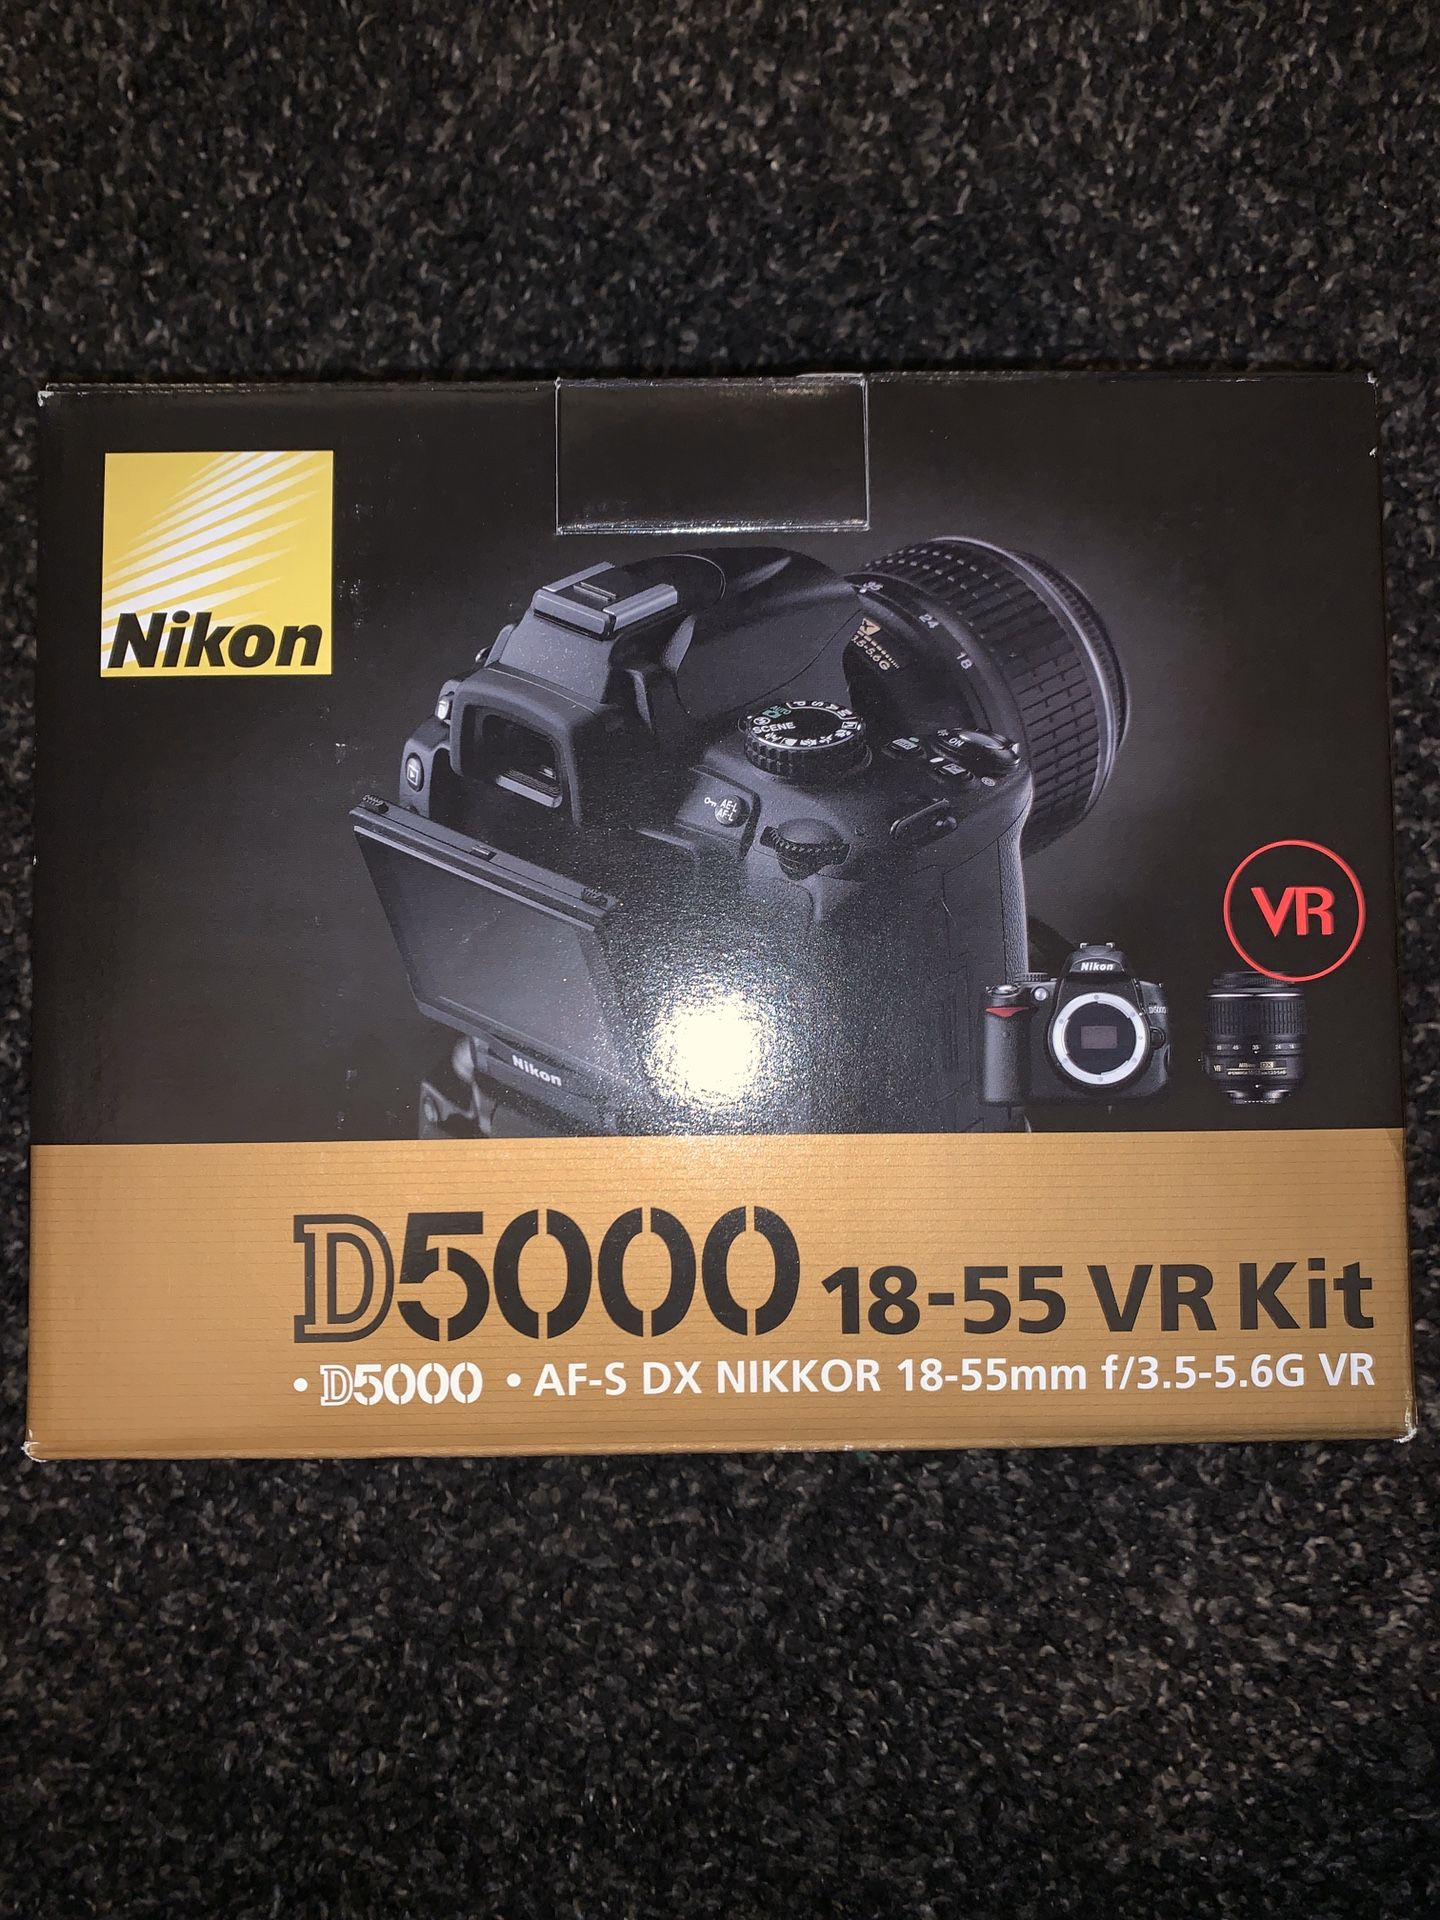 Nikon D5000. Comes with lense, battery & charger